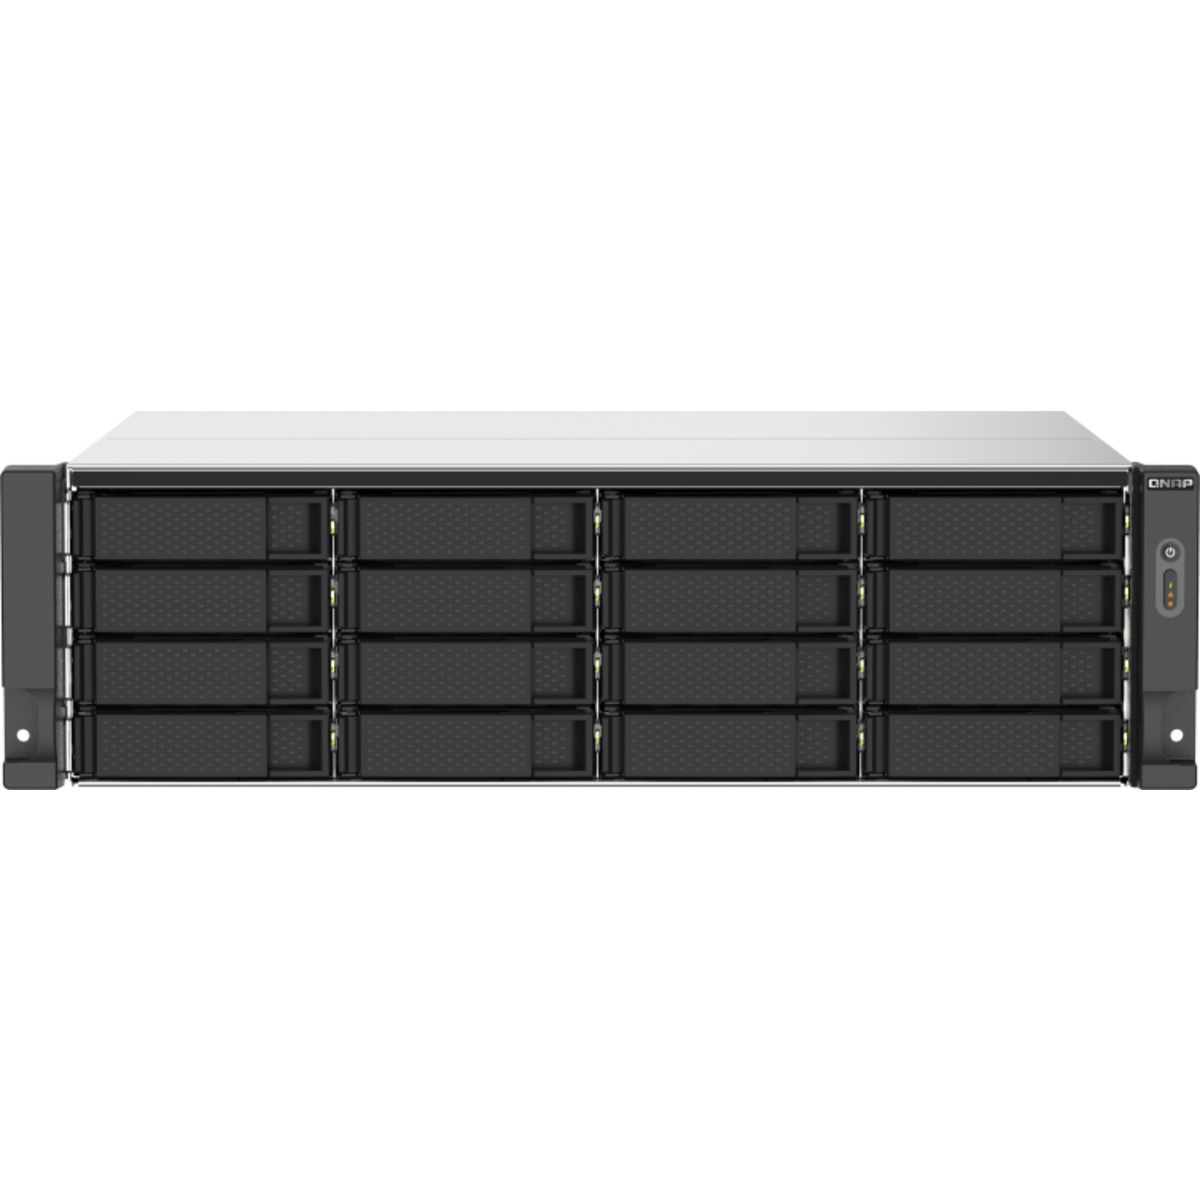 QNAP TS-1673AU-RP 90tb 16-Bay RackMount Multimedia / Power User / Business NAS - Network Attached Storage Device 15x6tb Seagate IronWolf ST6000VN006 3.5 5400rpm SATA 6Gb/s HDD NAS Class Drives Installed - Burn-In Tested - FREE RAM UPGRADE TS-1673AU-RP